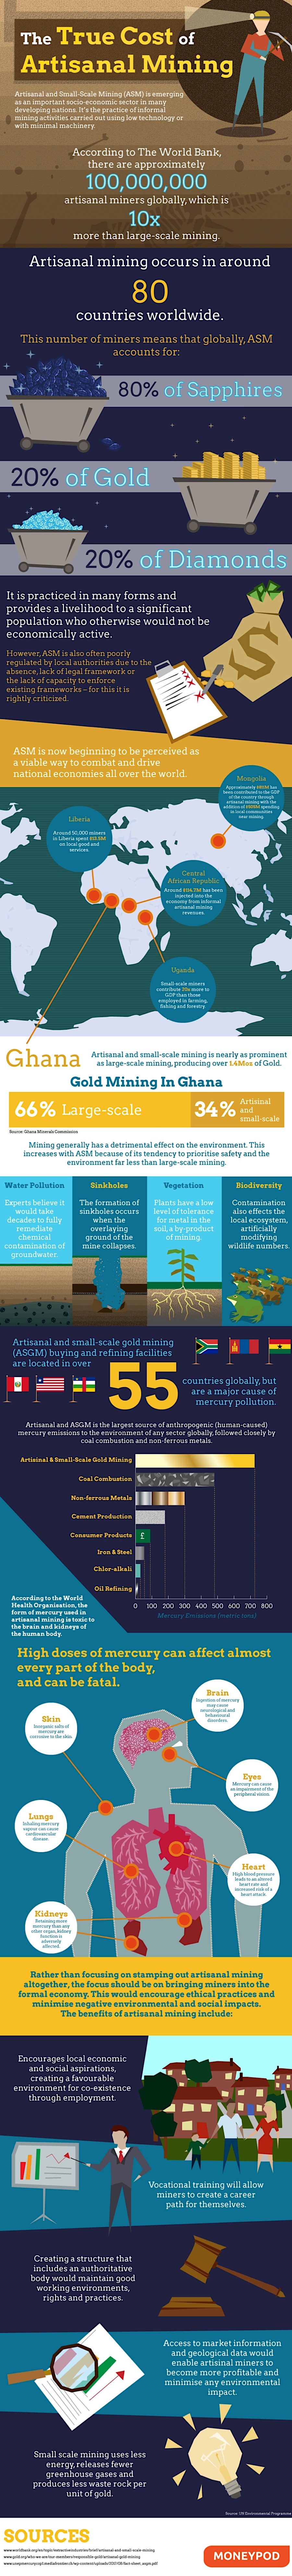 INFOGRAPHIC: The true costs of artisanal mining